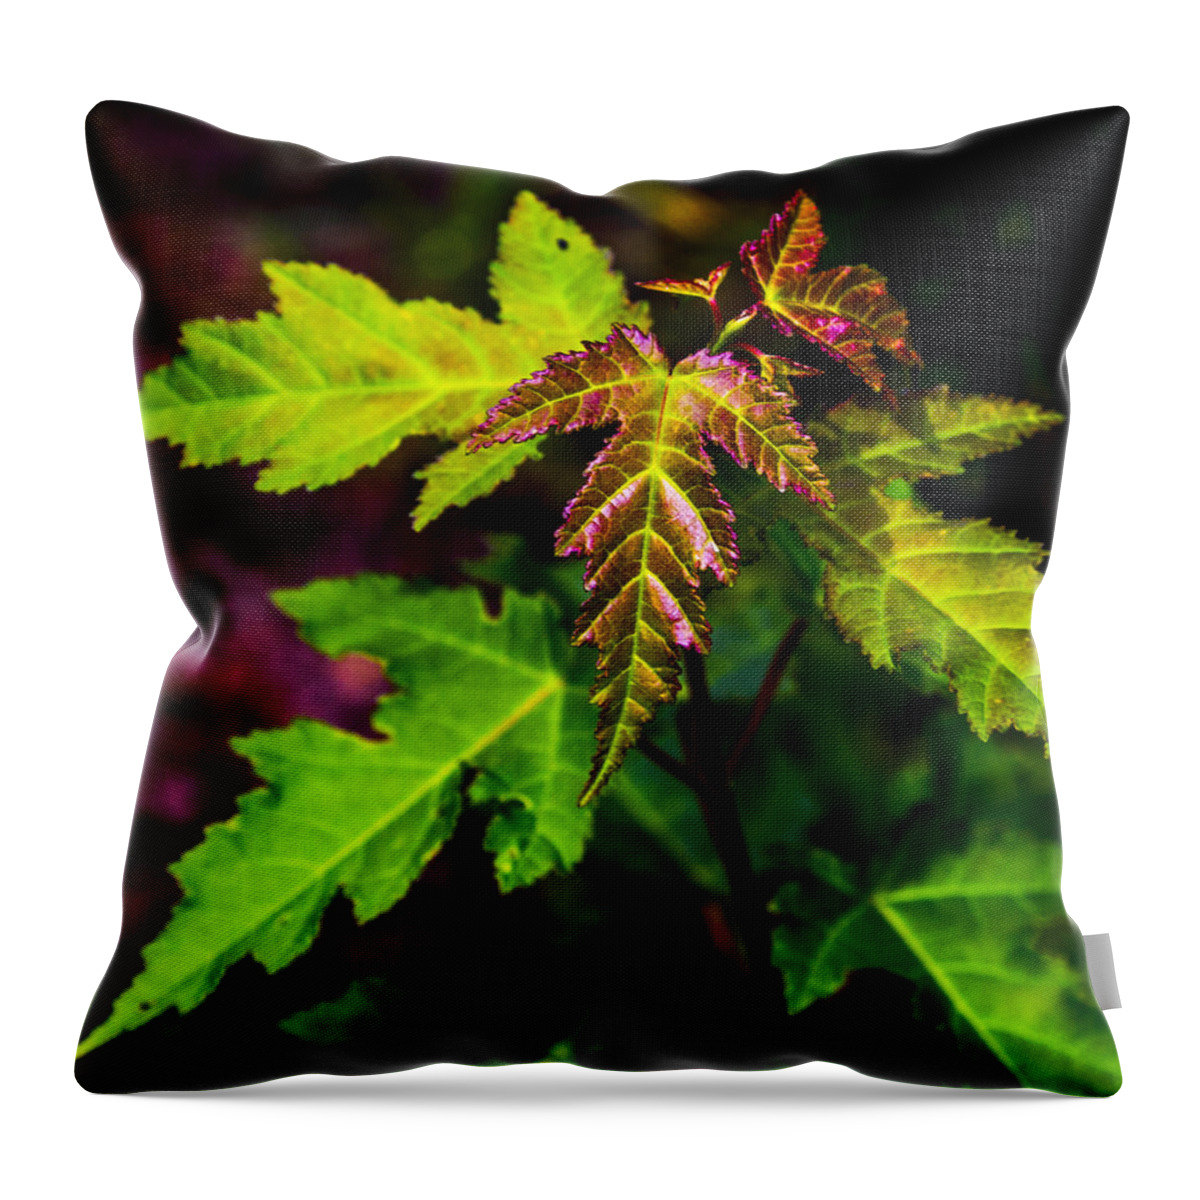 University Of Idaho Arboretum Throw Pillow featuring the photograph Jagged Leaves by Angus HOOPER III